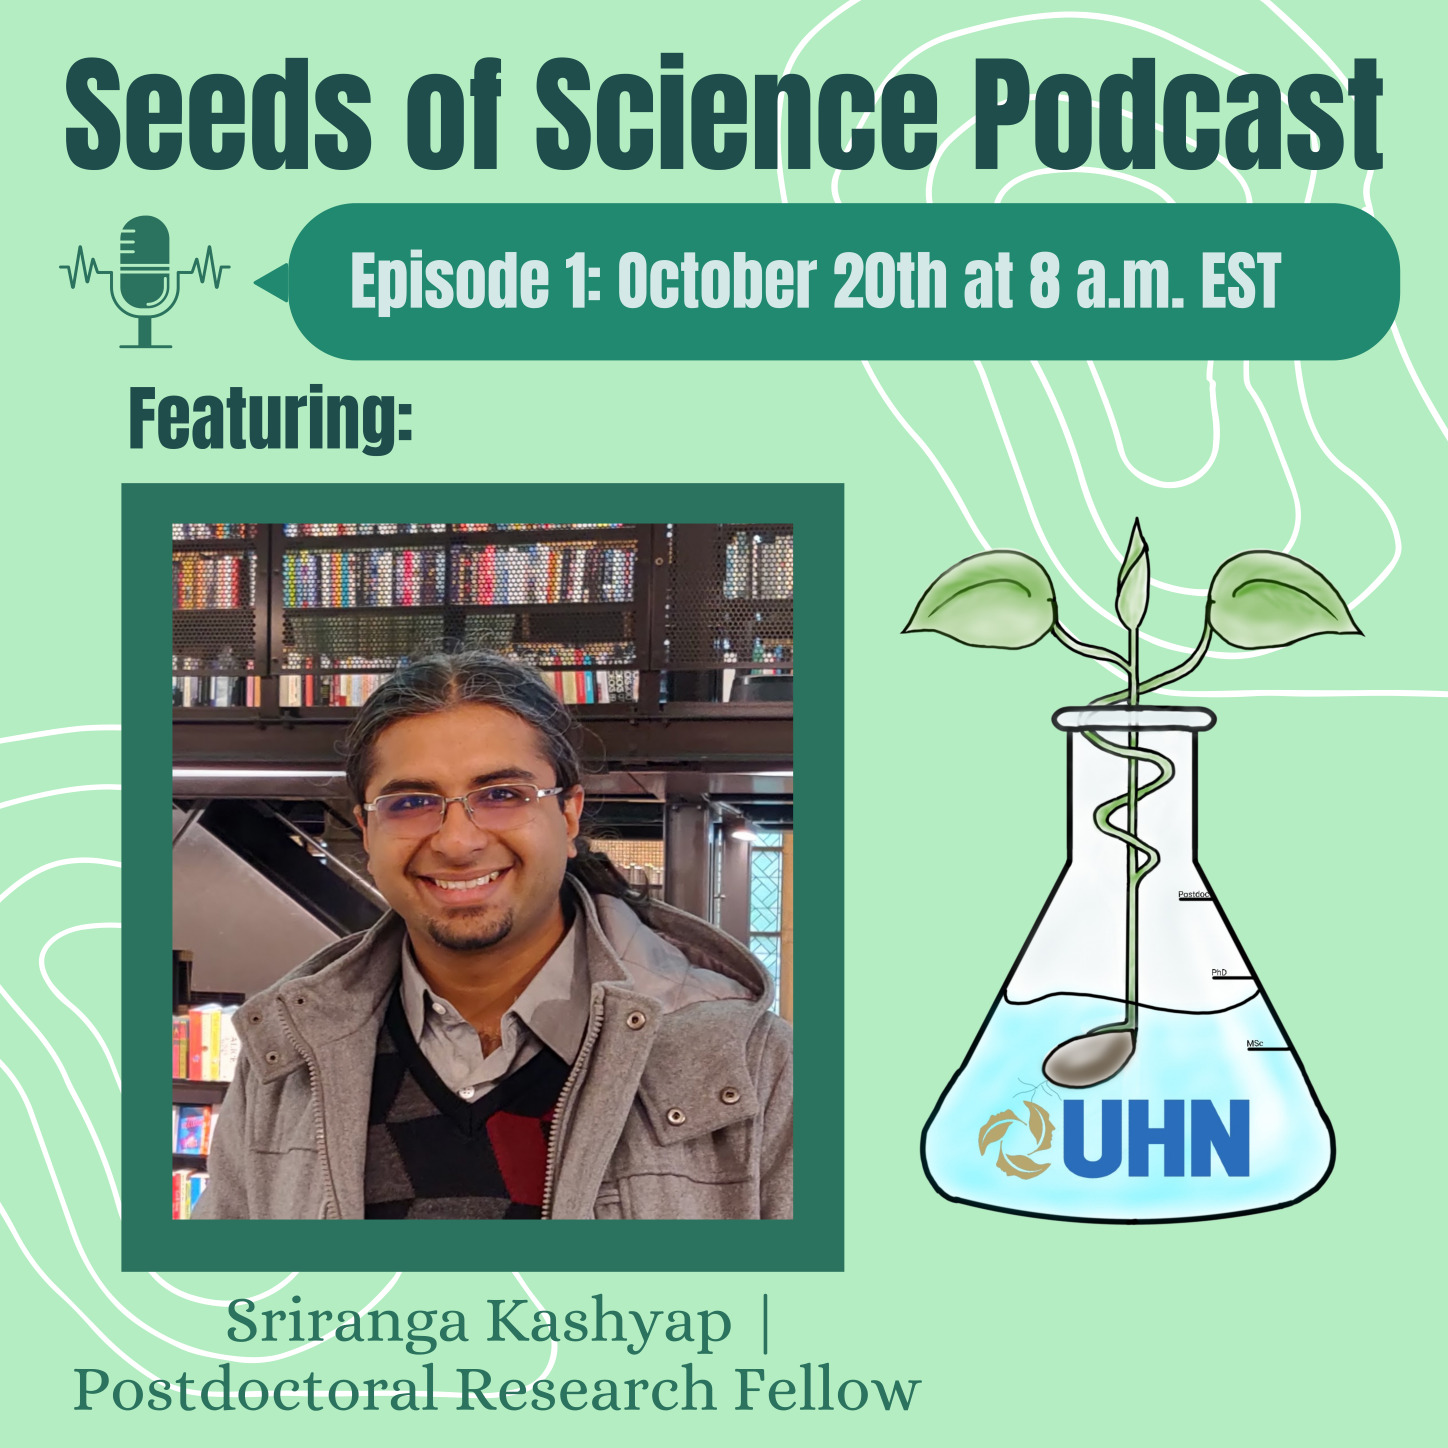 Seeds of Science Podcast poster. Episode 1: October 20th at 8 am EST. Featuring Sriranga Kashyap | Postdoctoral Research Fellow. The poster is light green with a picture of Sri in the middle and the UHN seeds of science logo on the right.